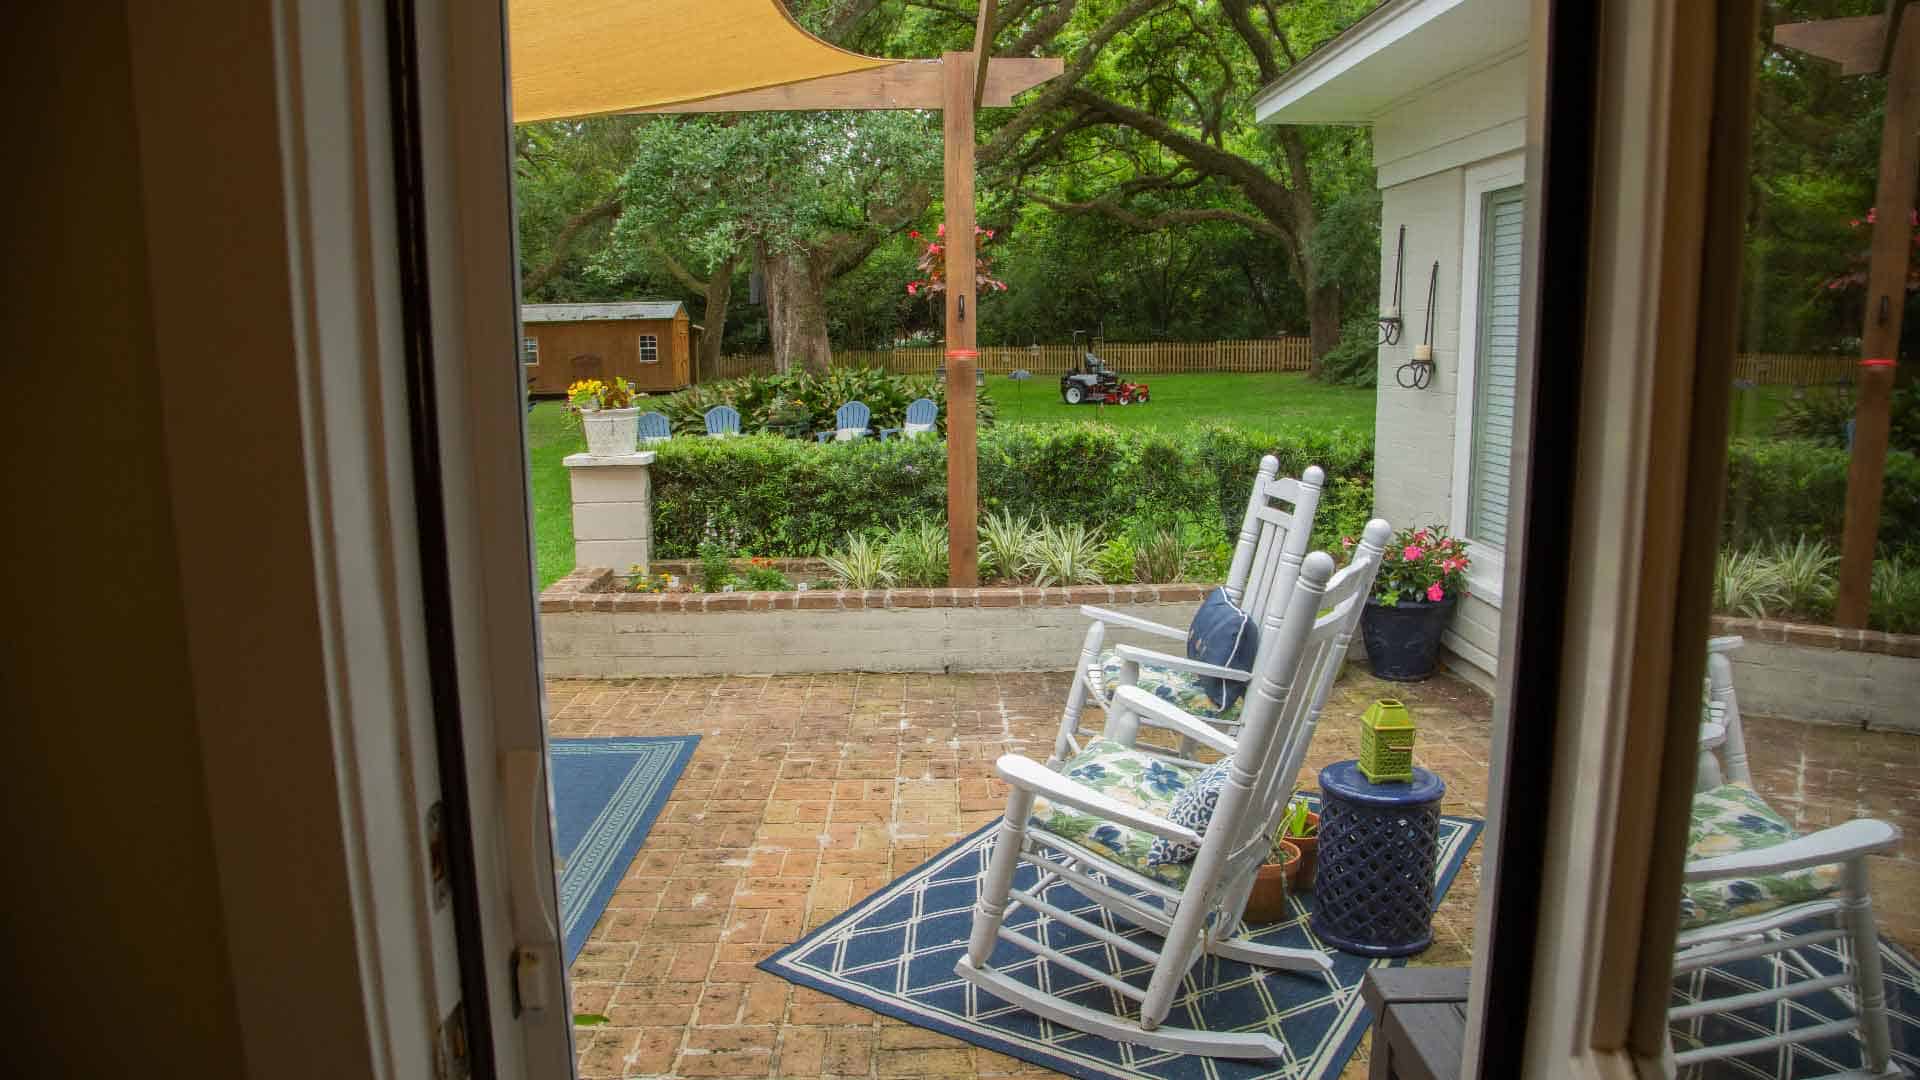 DIY Backyard Project #2: A Retractable screen can help you bring the outside in.